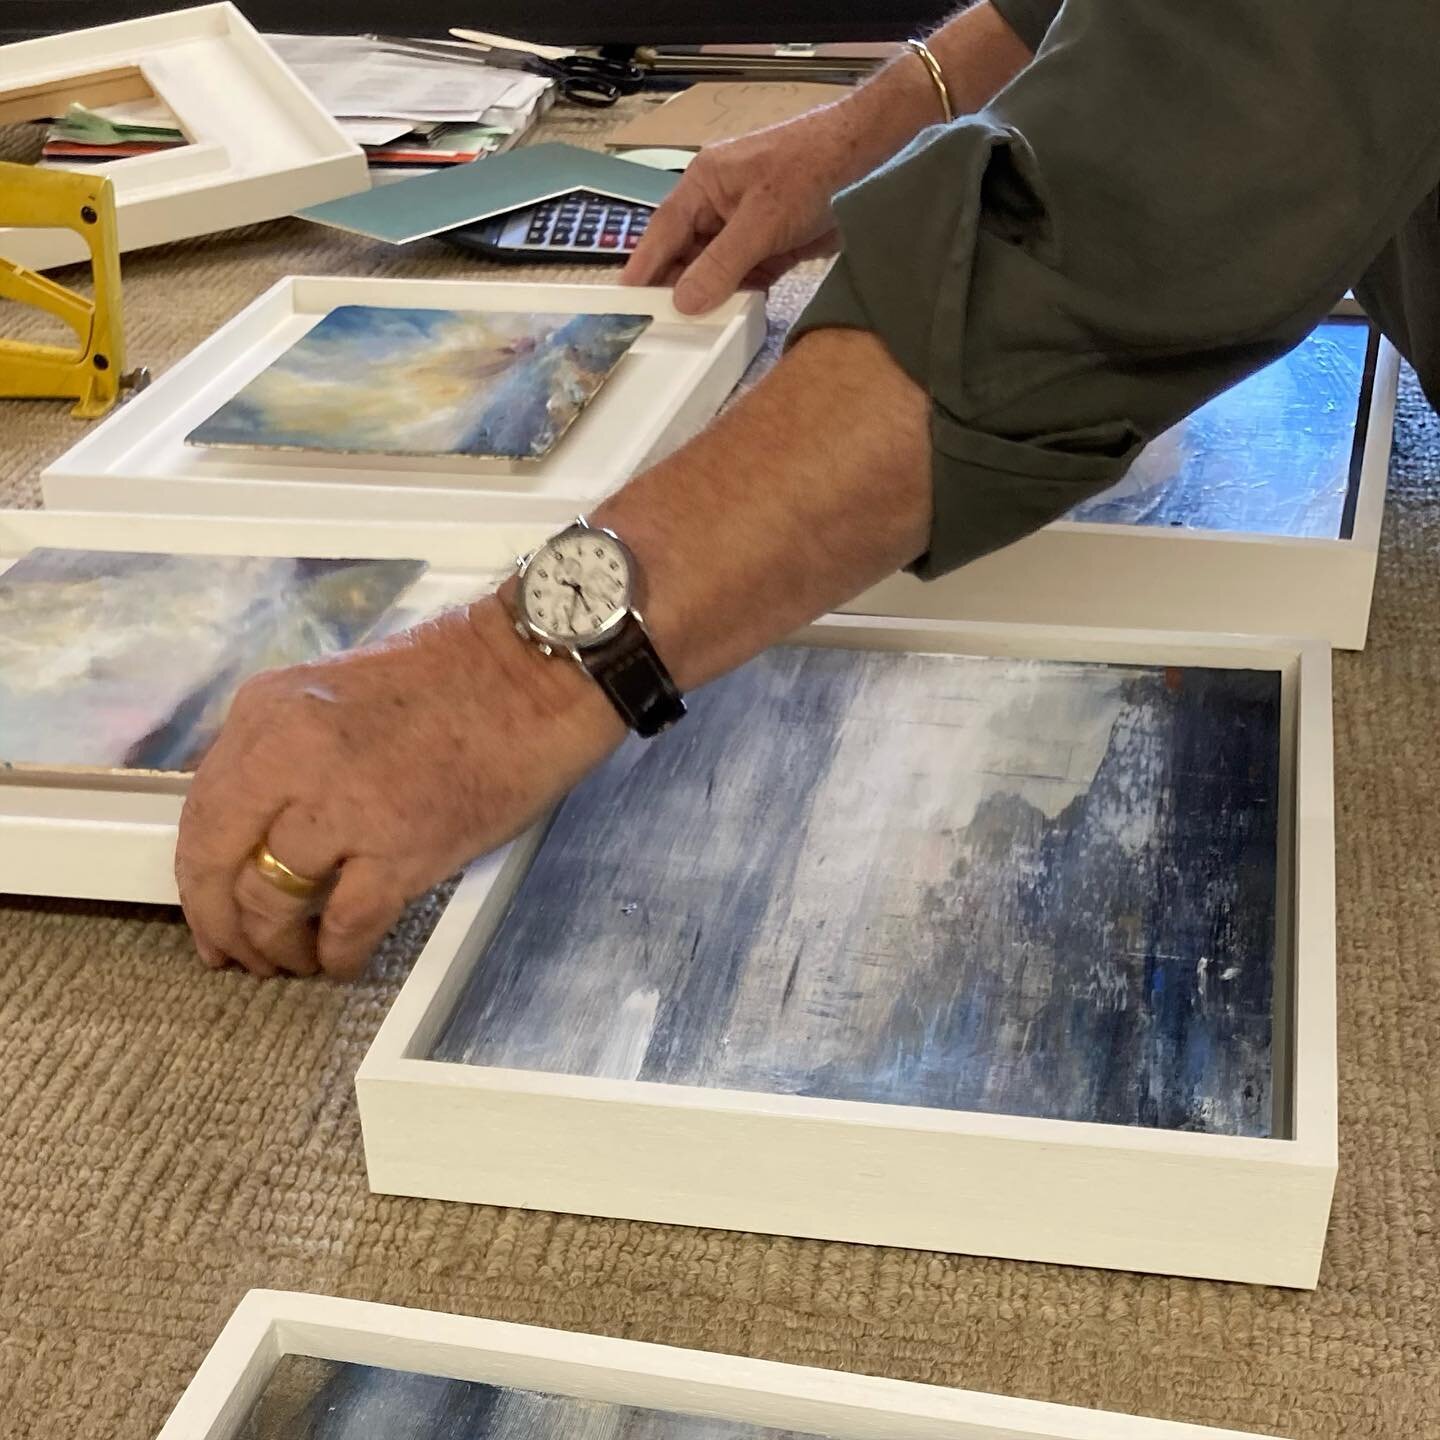 Feelgood Friday. Collecting work from my framer. So happy with the work that he&rsquo;s done for me that I bought him a bottle of wine. 🍷Happy Friday everybody! 

#feelgoodfriday #framing #artisticprocess #artprocess #newwork